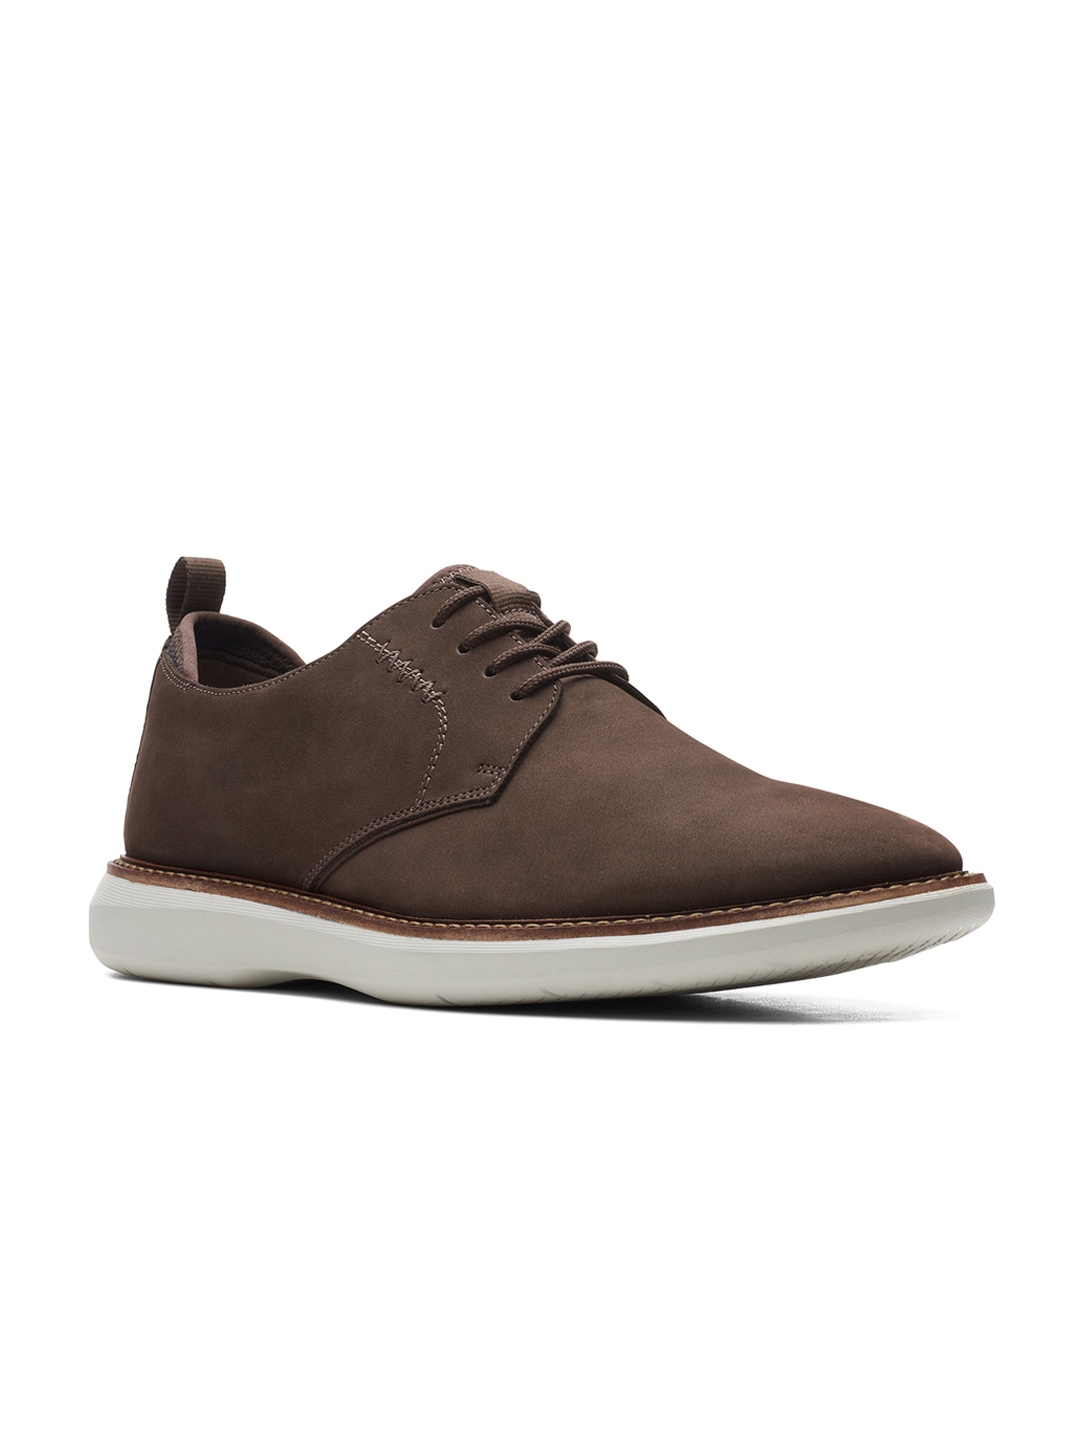 Buy Clarks Men Coffee Brown Nubuck Leather Derbys - Casual Shoes for ...